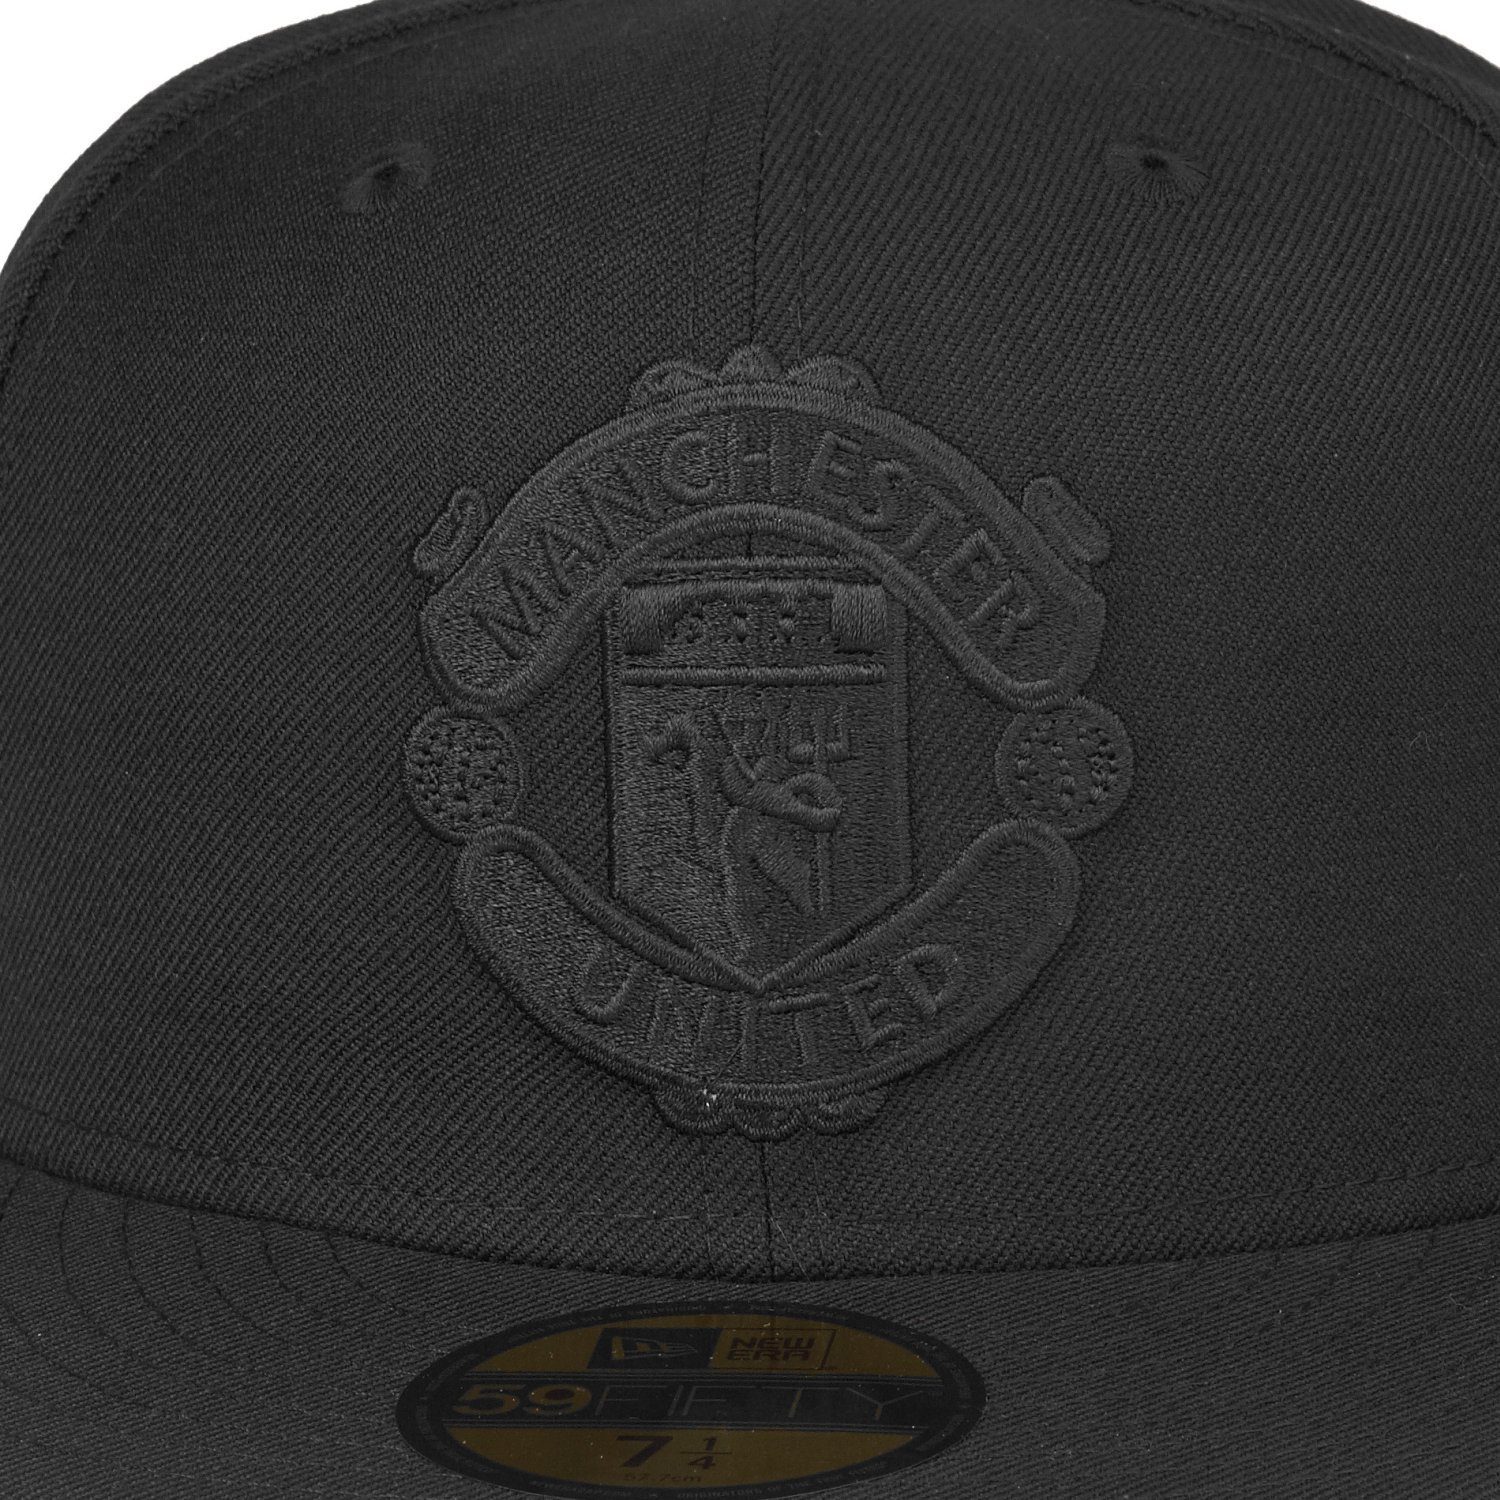 New Fitted 59Fifty Era United Cap Manchester